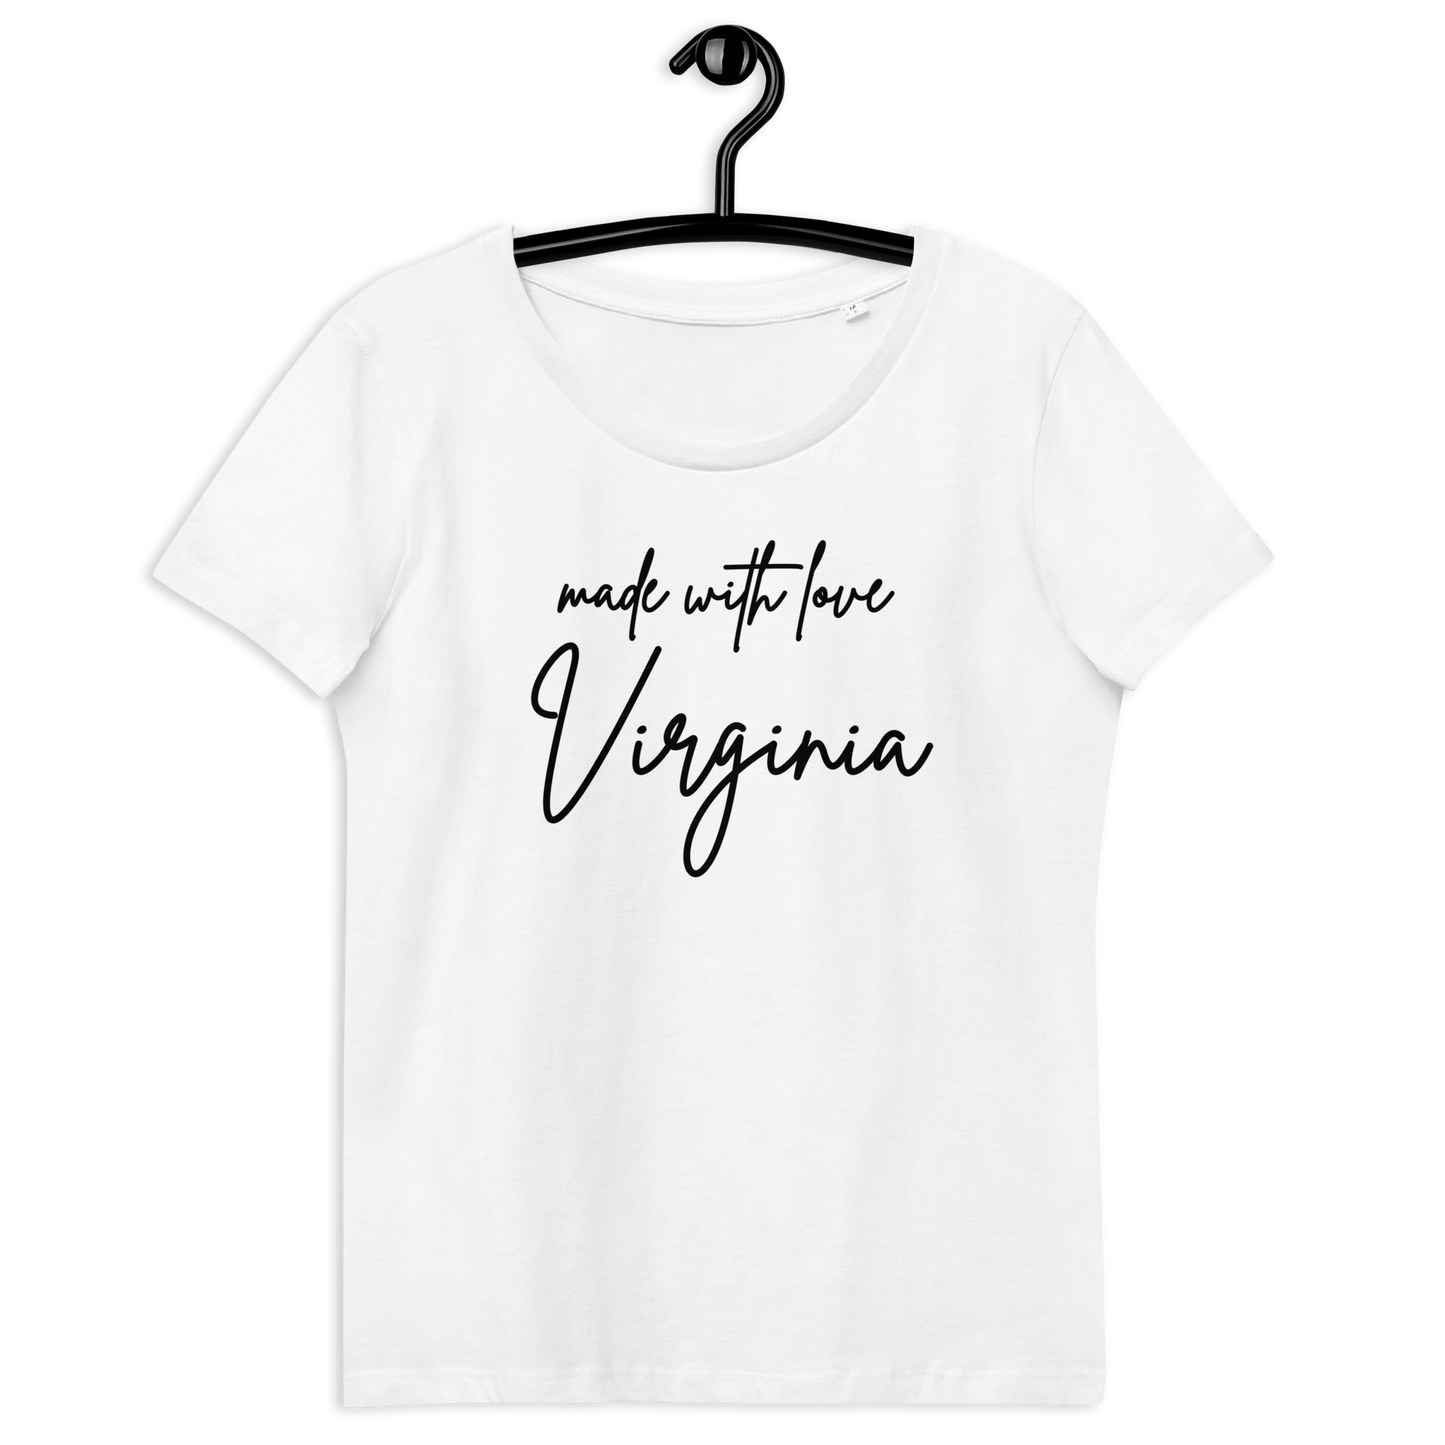 Made with Love Virginia Women's Fitted Eco-friendly T-Shirt White/Black